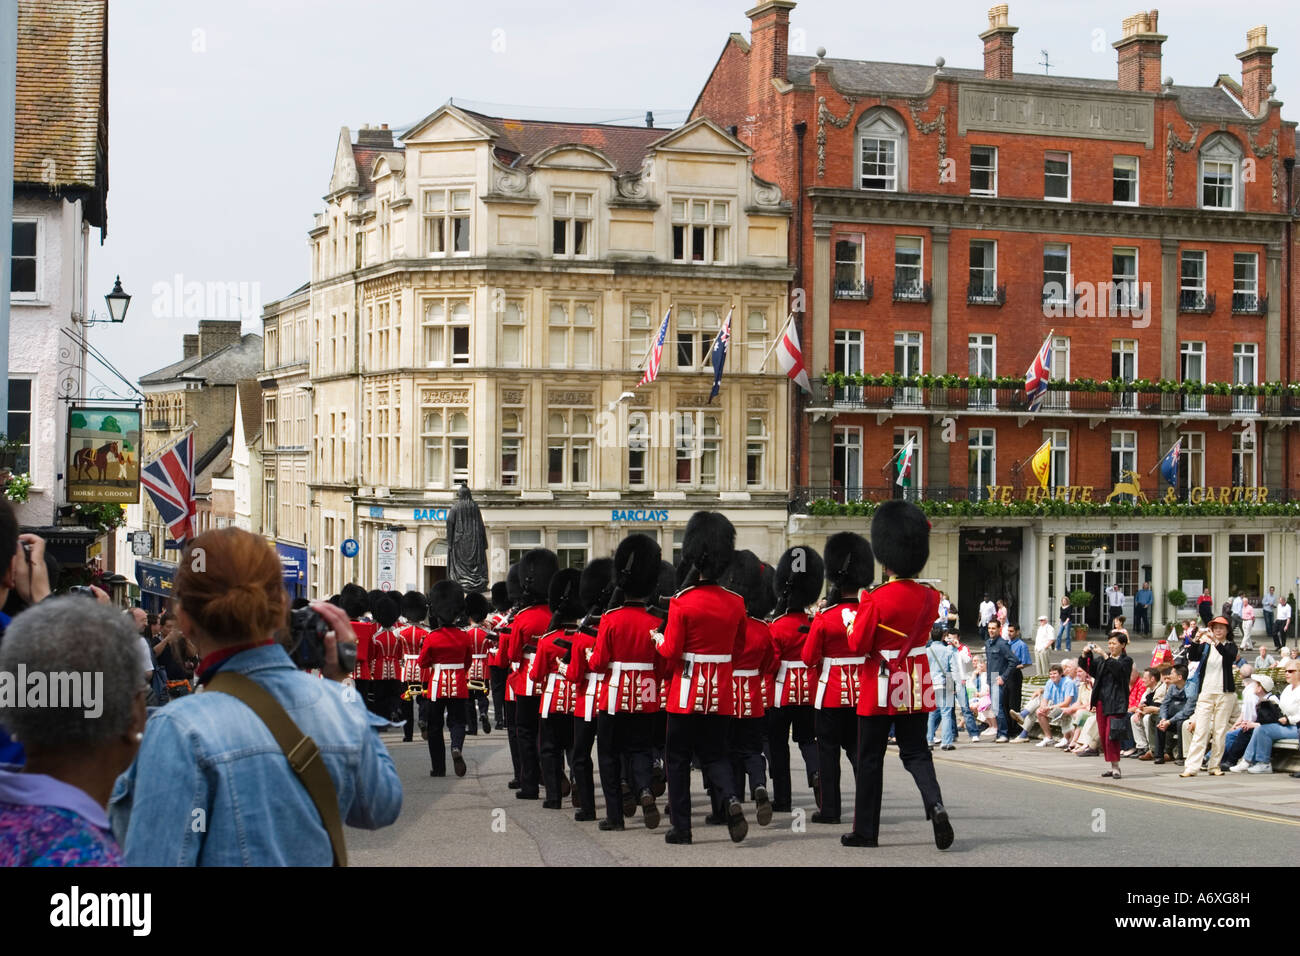 ENGLAND Windsor Changing of the Queens guard marching down street red coats and uniforms tourists stand on sidewalk watching Stock Photo